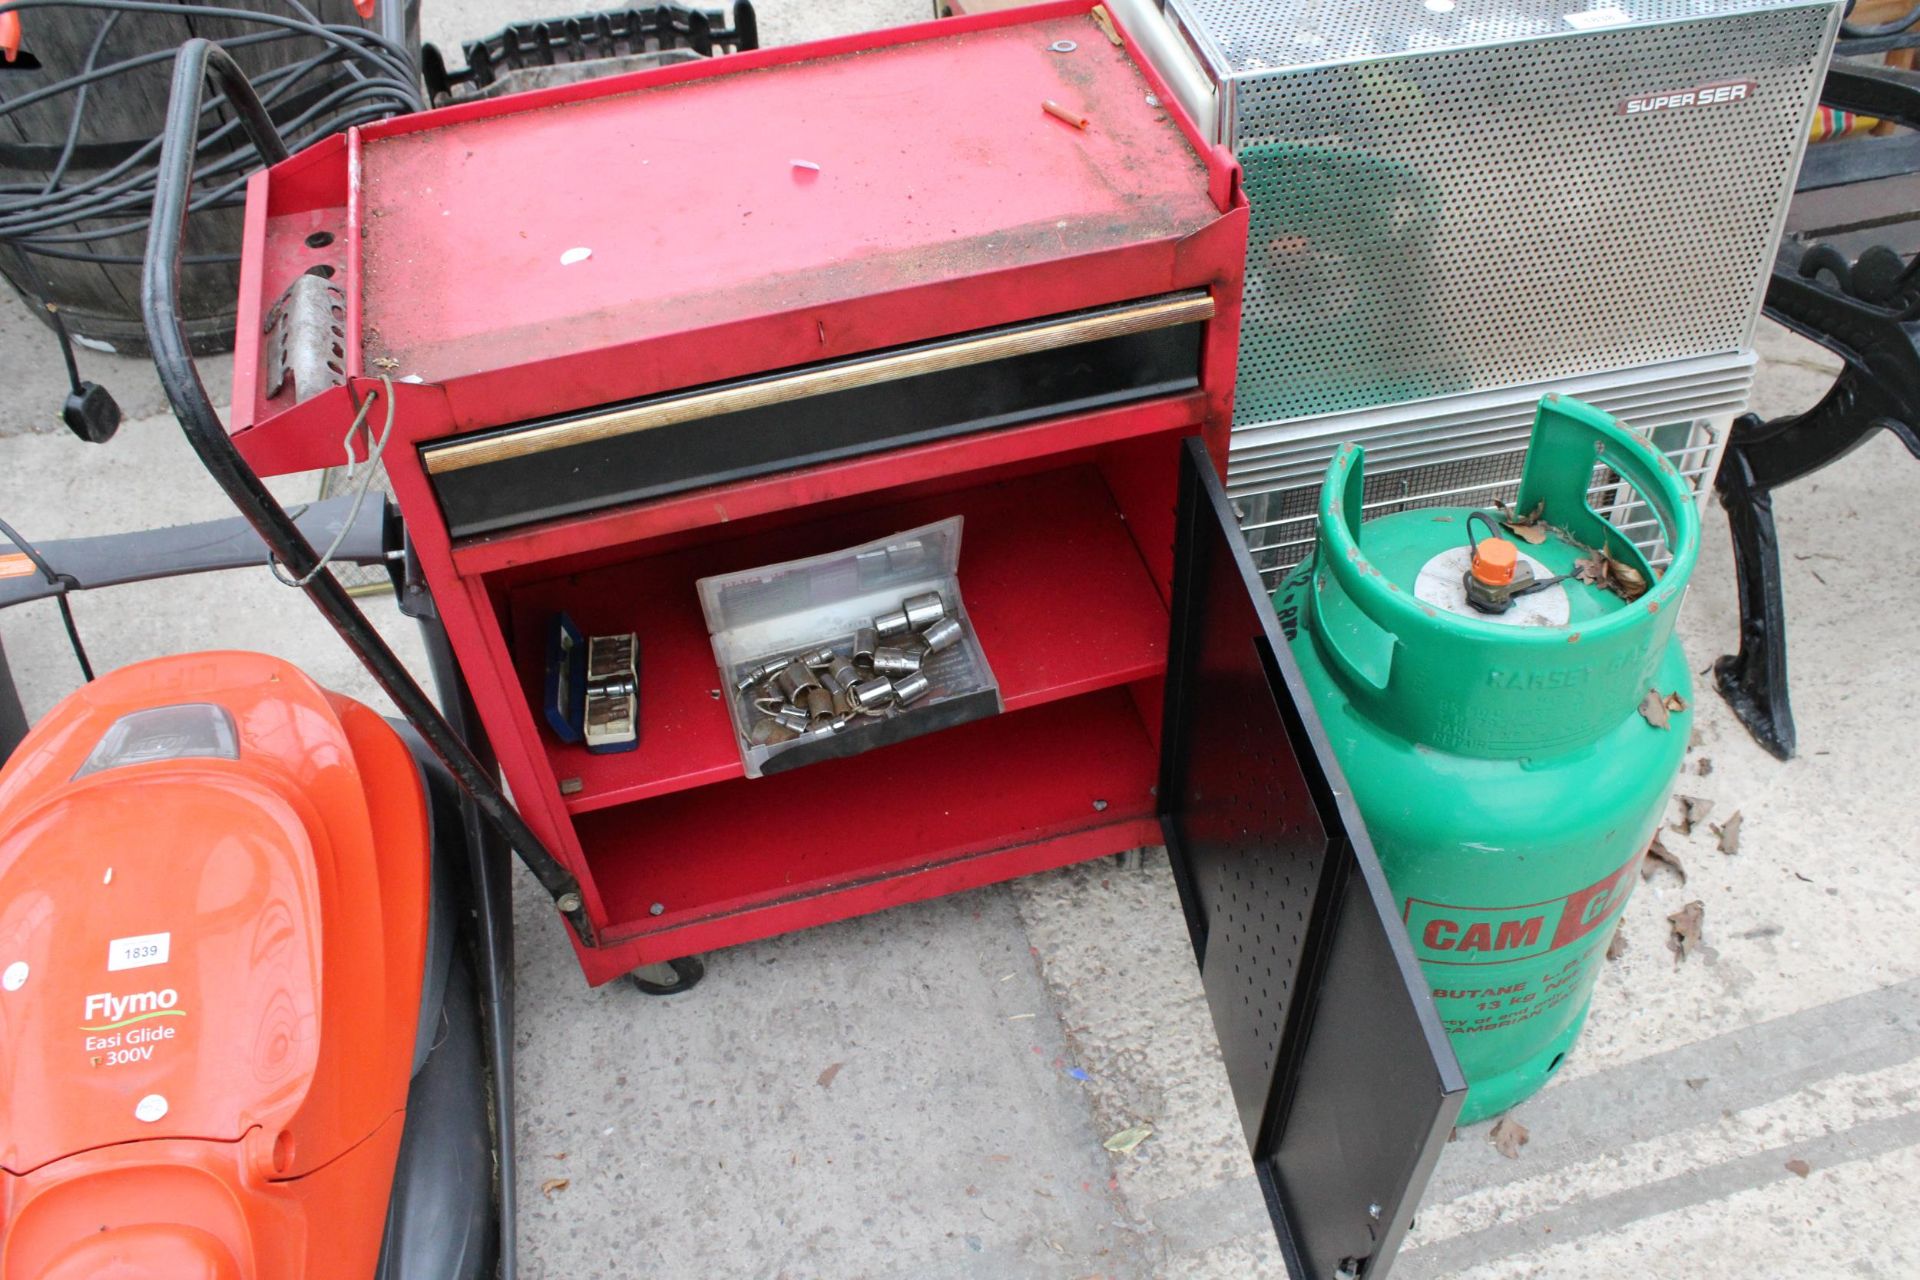 A SUPERSER GAS HEATER WITH GAS BOTTLE AND A METAL FOUR WHEELED WORKSHOP TOOL CHEST - Image 4 of 5